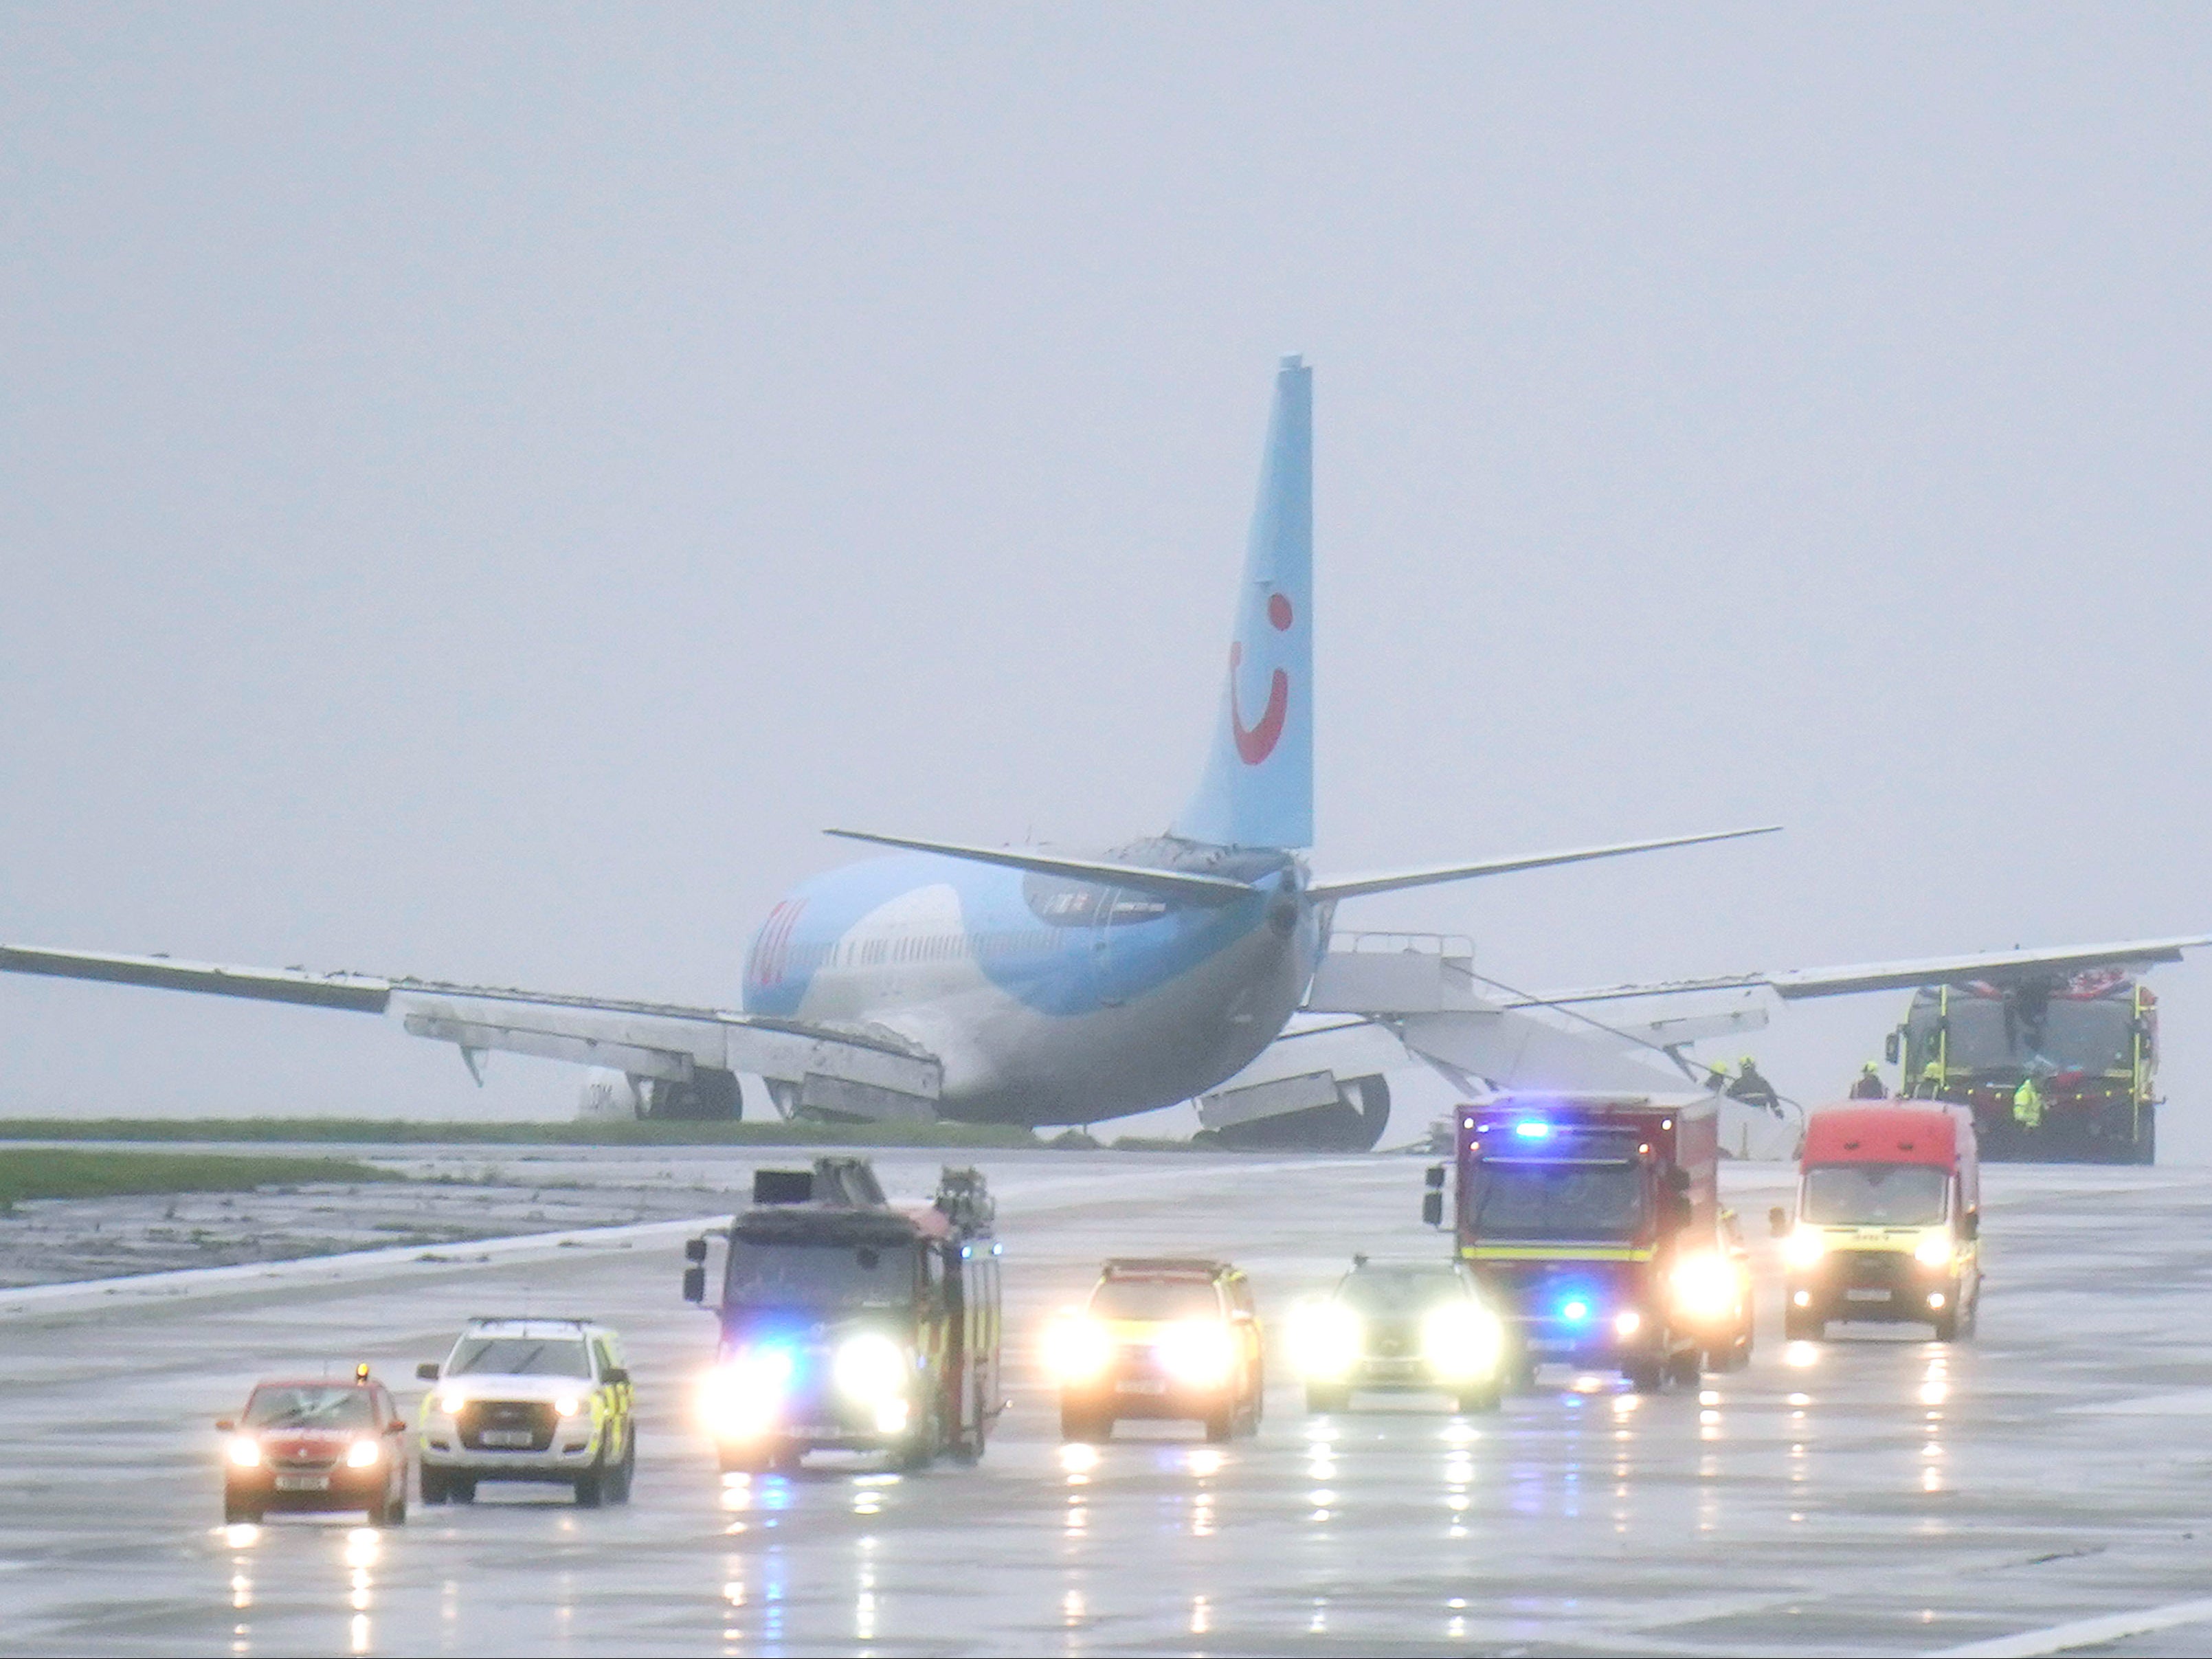 Emergency services at the scene after a passenger plane came off the runway at Leeds Bradford Airport while landing in windy conditions during Storm Babet